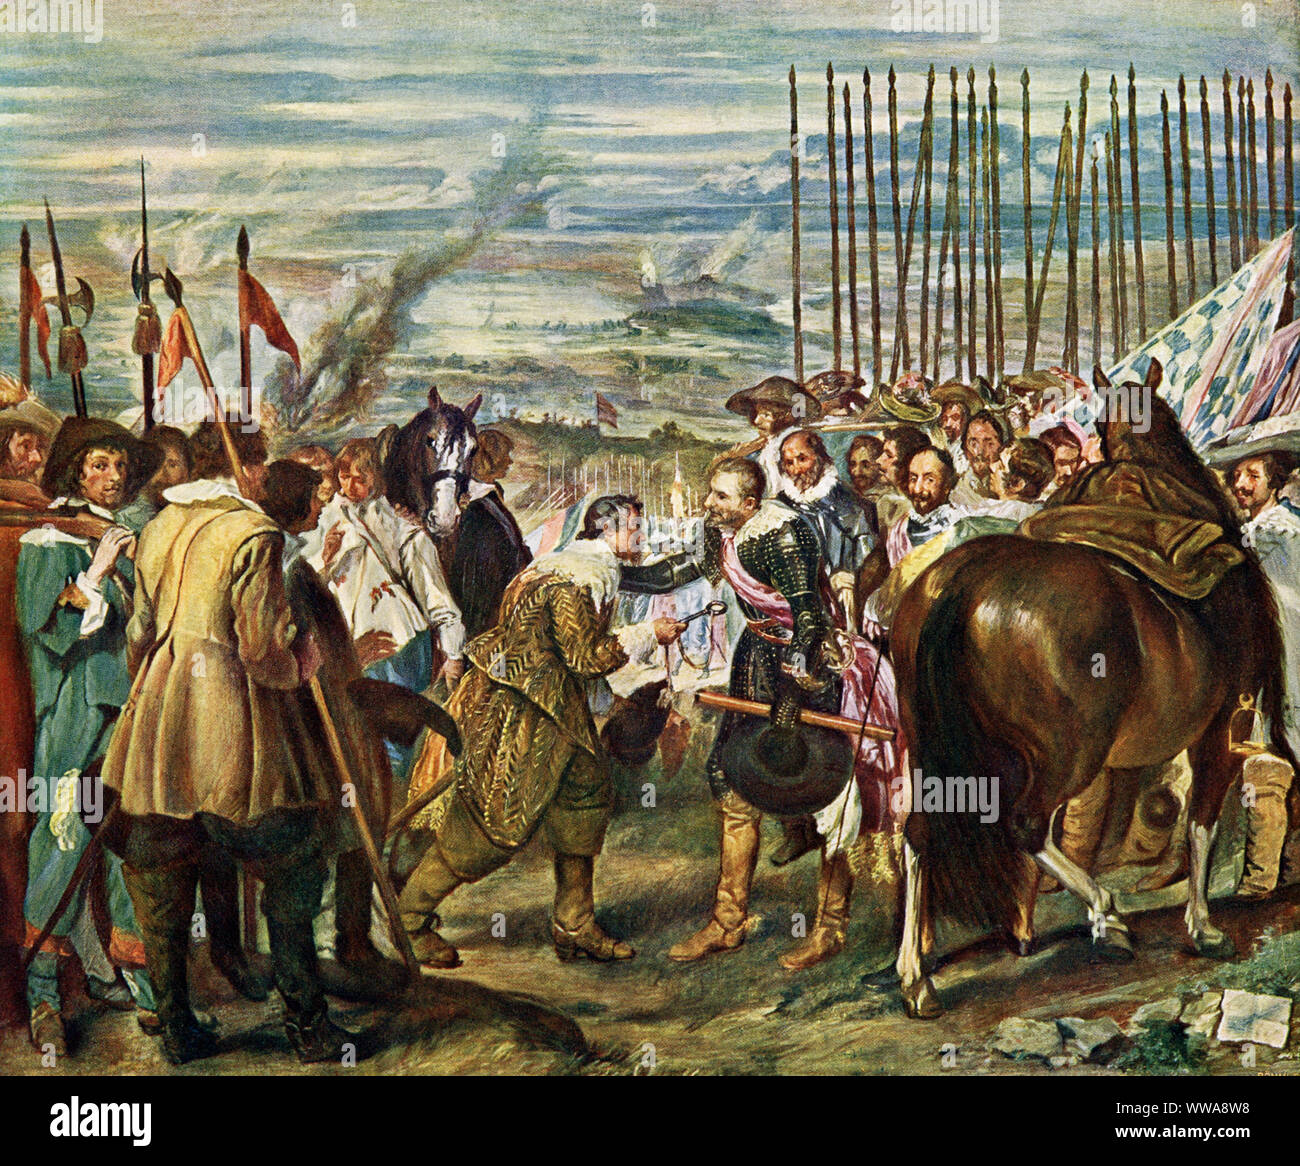 This painting by the Spanish Golden Age artist Diego Velasquez (1599-1669) is in the Prado Museum in Madrid. It is titled: The Surrender of Breda. It is also known as The Lances. It was completed between 1634-1635. The painting depicts the exchange of the key of Breda from the Dutch's possession, to the Spanish. It introduced new technqiues to Baroque style. Shown in the painting is the Dutch leader Justinus van Nassau handing over the key to Breda to the Spanish Genoese general, Spinola. The capitulation was signed in June of 1625. Stock Photo